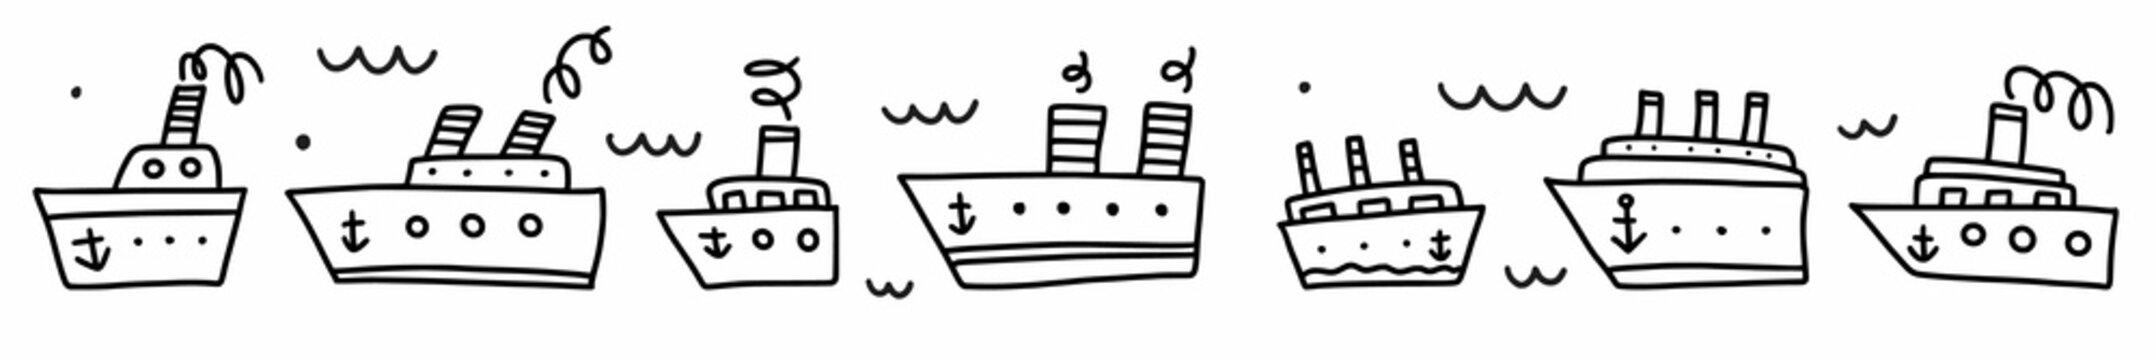 Vector, children's, horizontal pattern with ships, hand-drawn